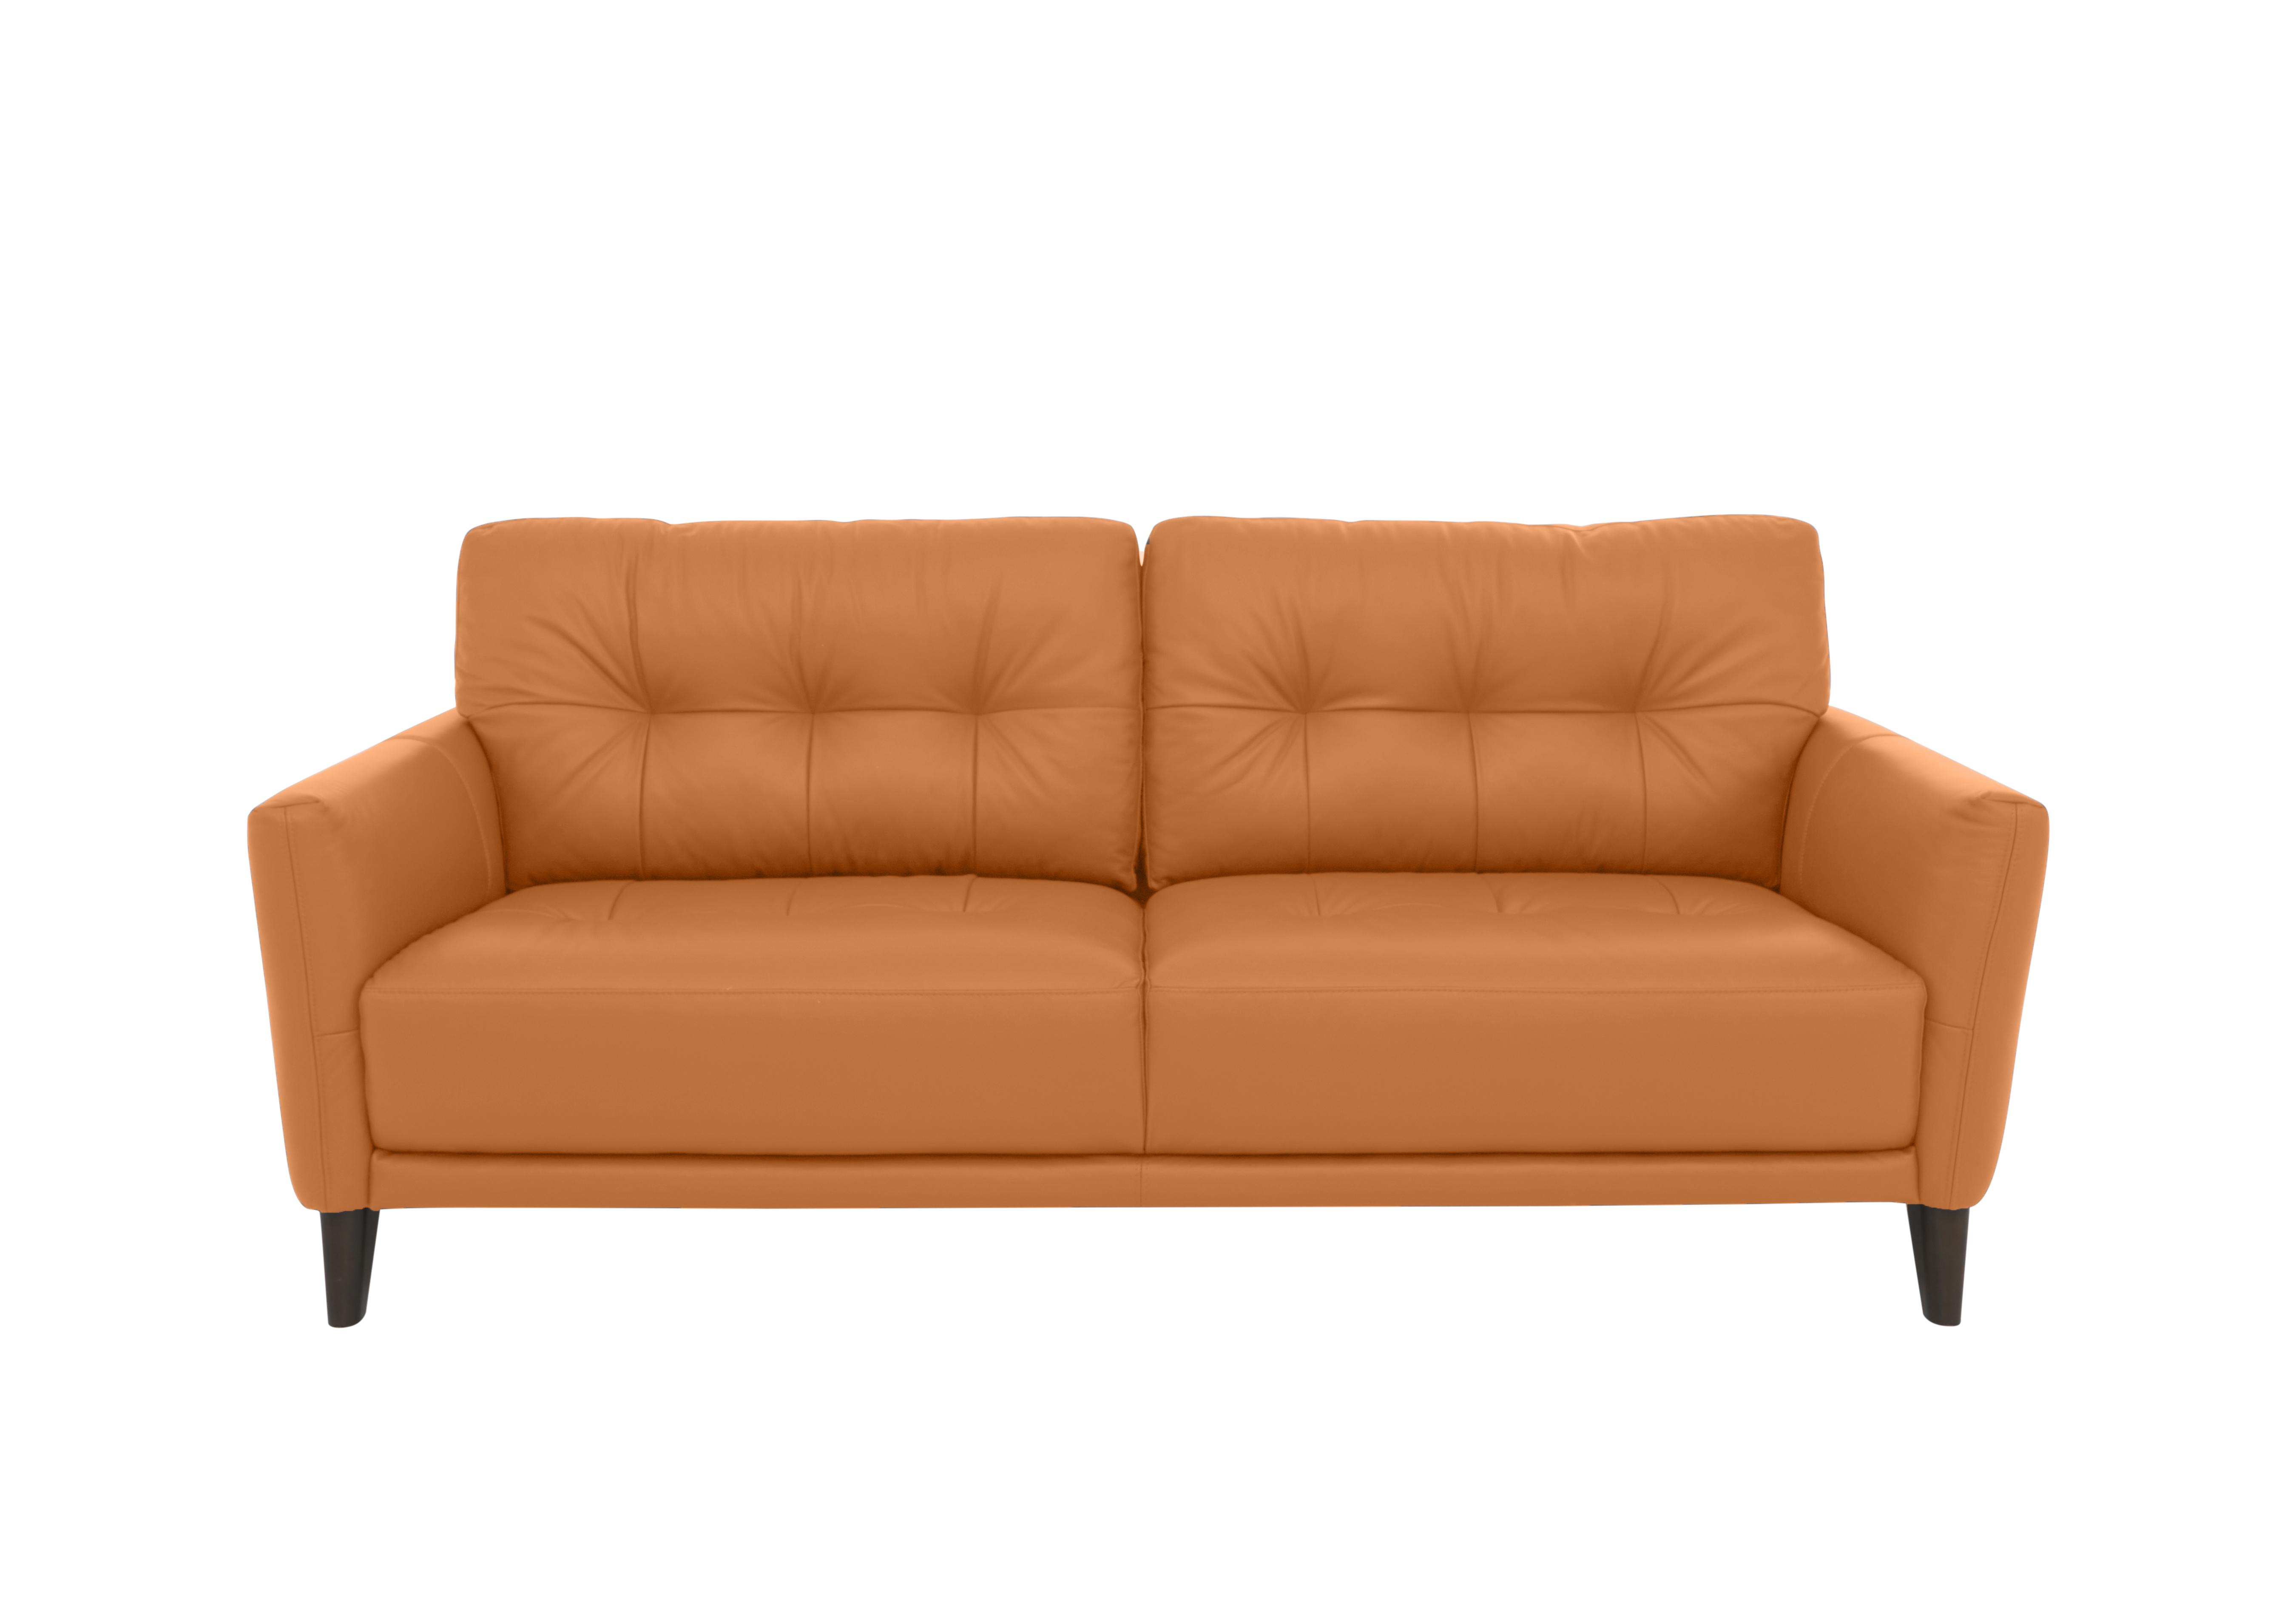 Uno Leather 3 Seater Sofa in Bv-335e Honey Yellow on Furniture Village